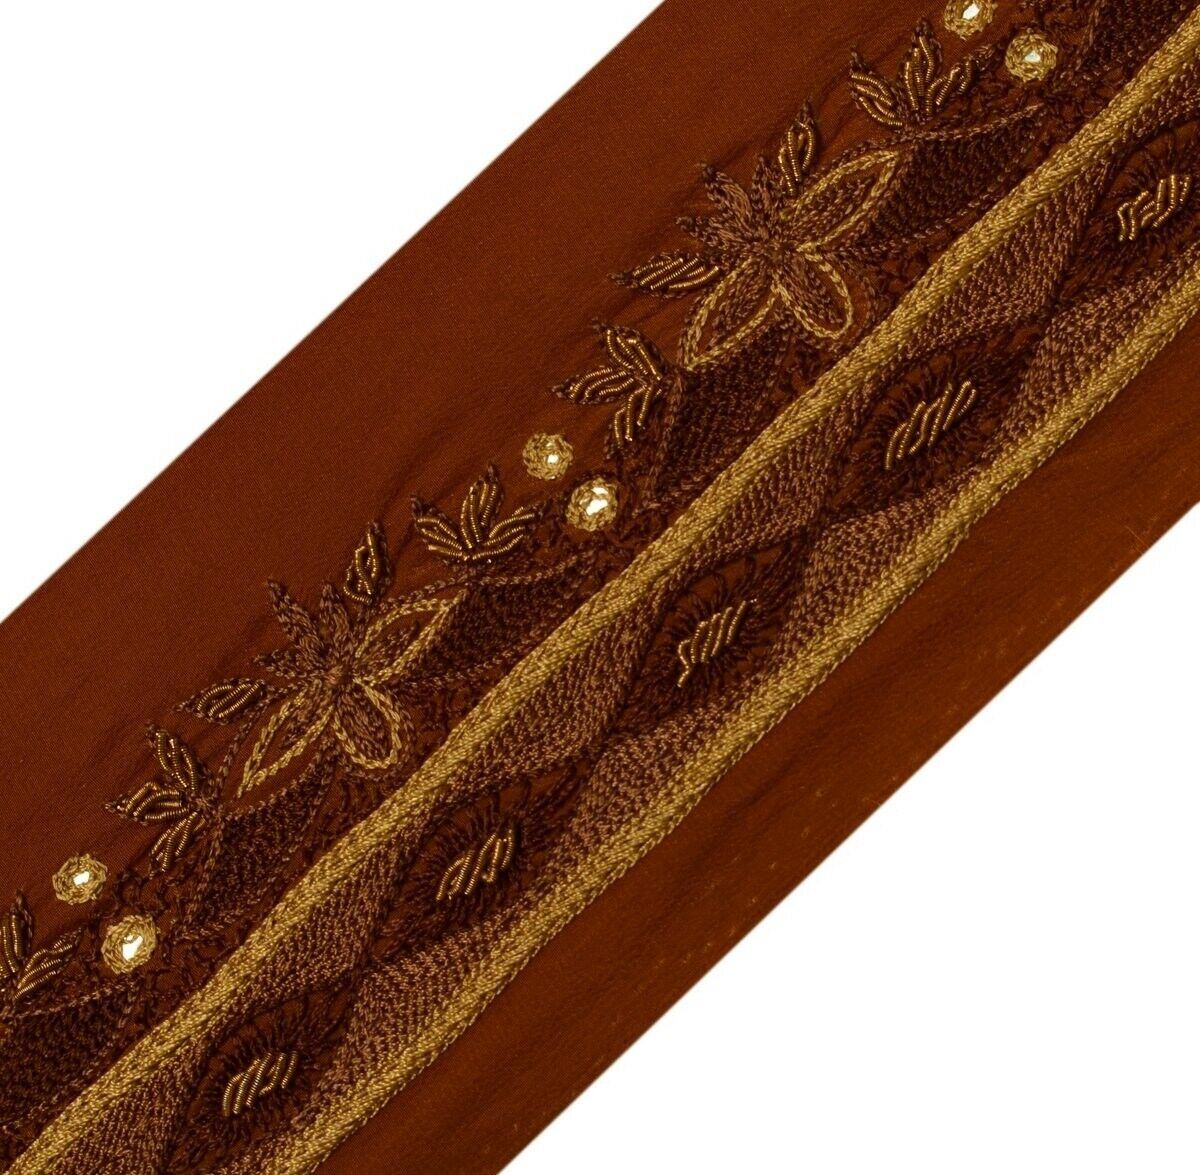 Vintage Saree Border Indian Craft Trim Hand Beaded Embroidered Ribbon Lace Brown